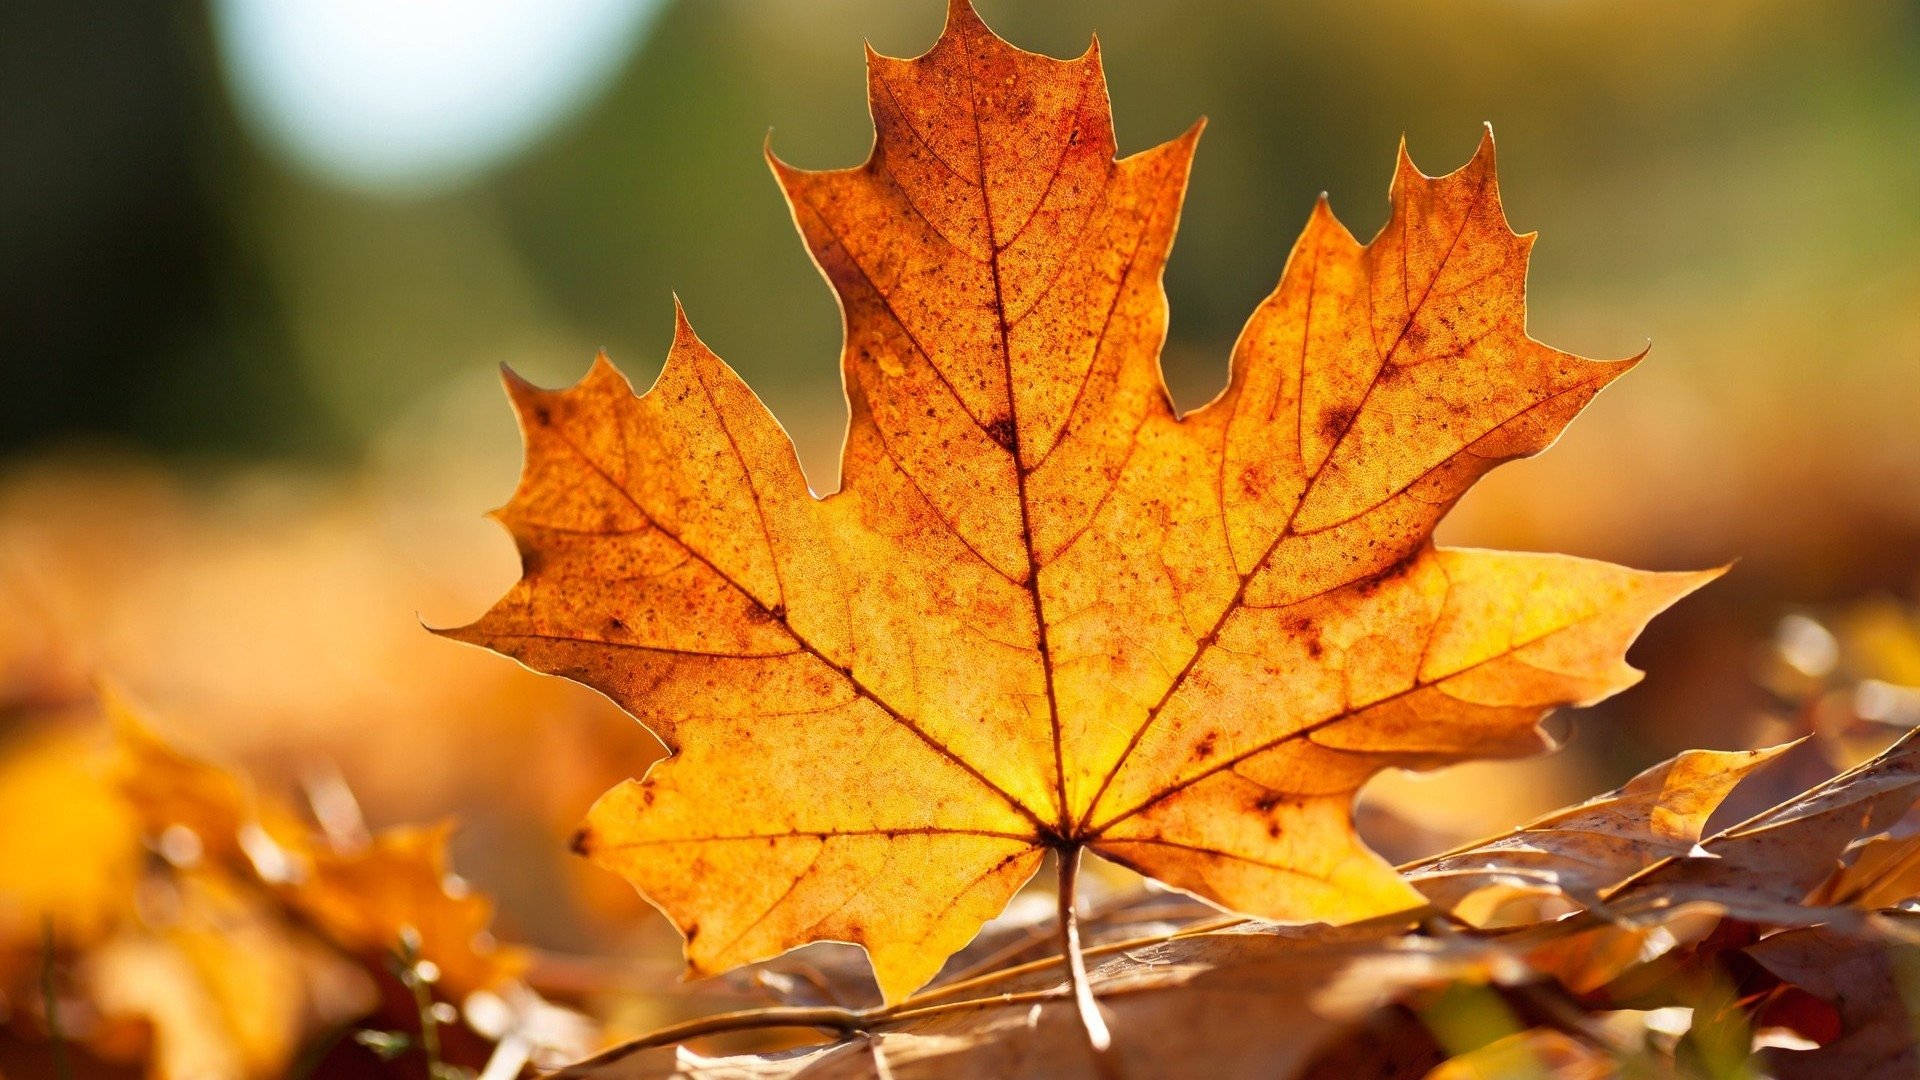 Toronto Maple Leafs On Dry Leaves Wallpaper